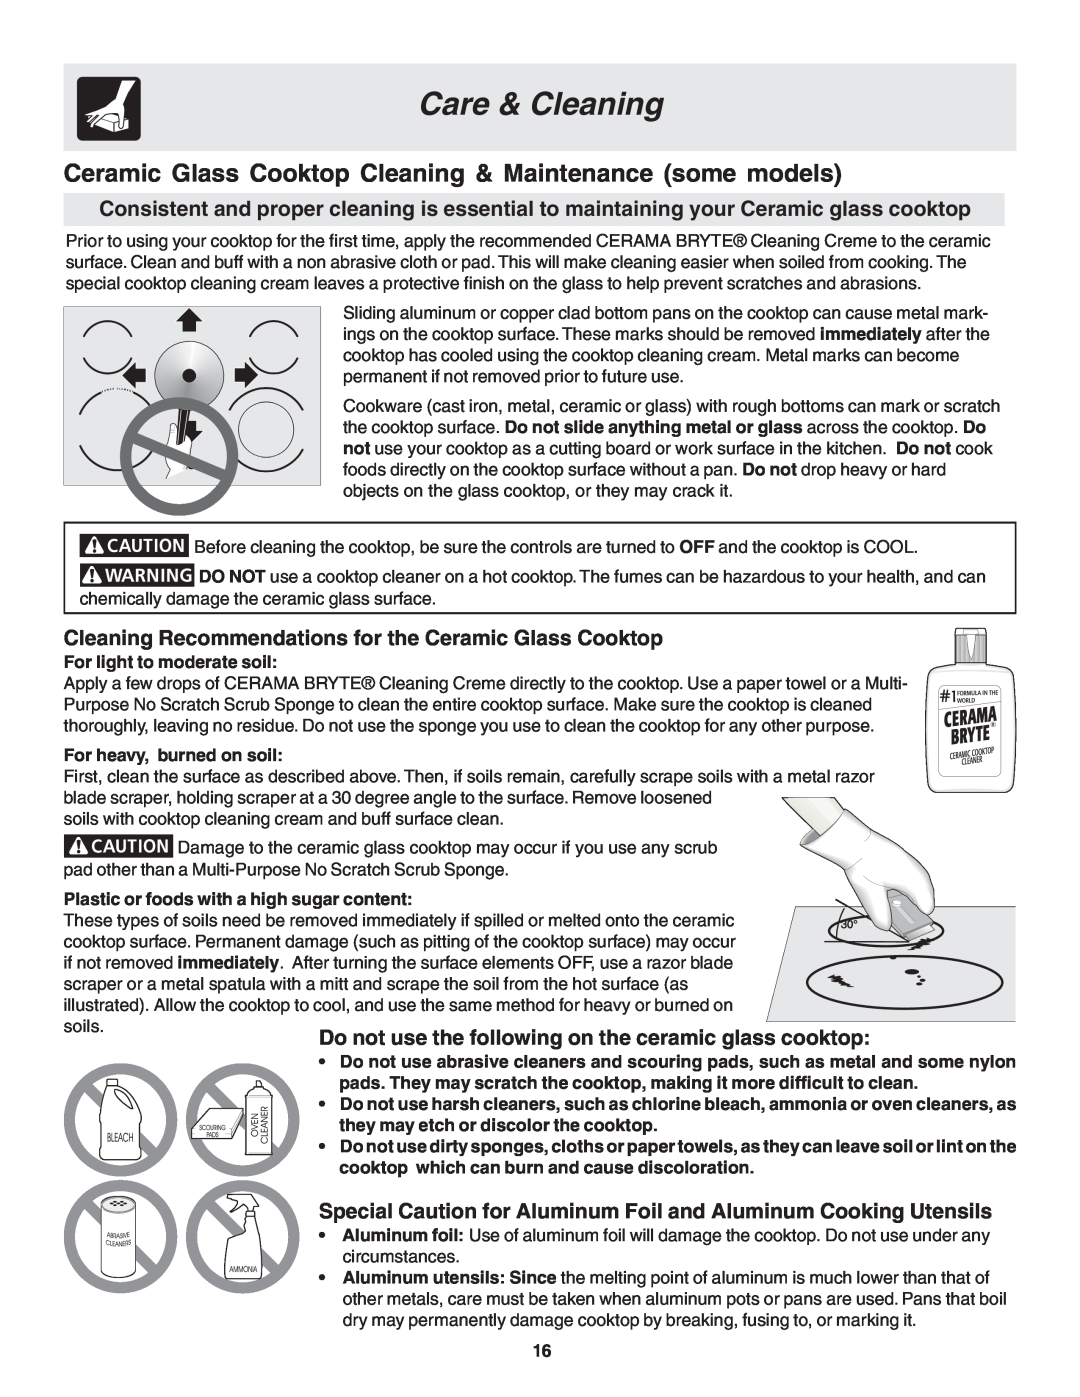 Frigidaire 318200439 Care & Cleaning, Cleaning Recommendations for the Ceramic Glass Cooktop, For light to moderate soil 